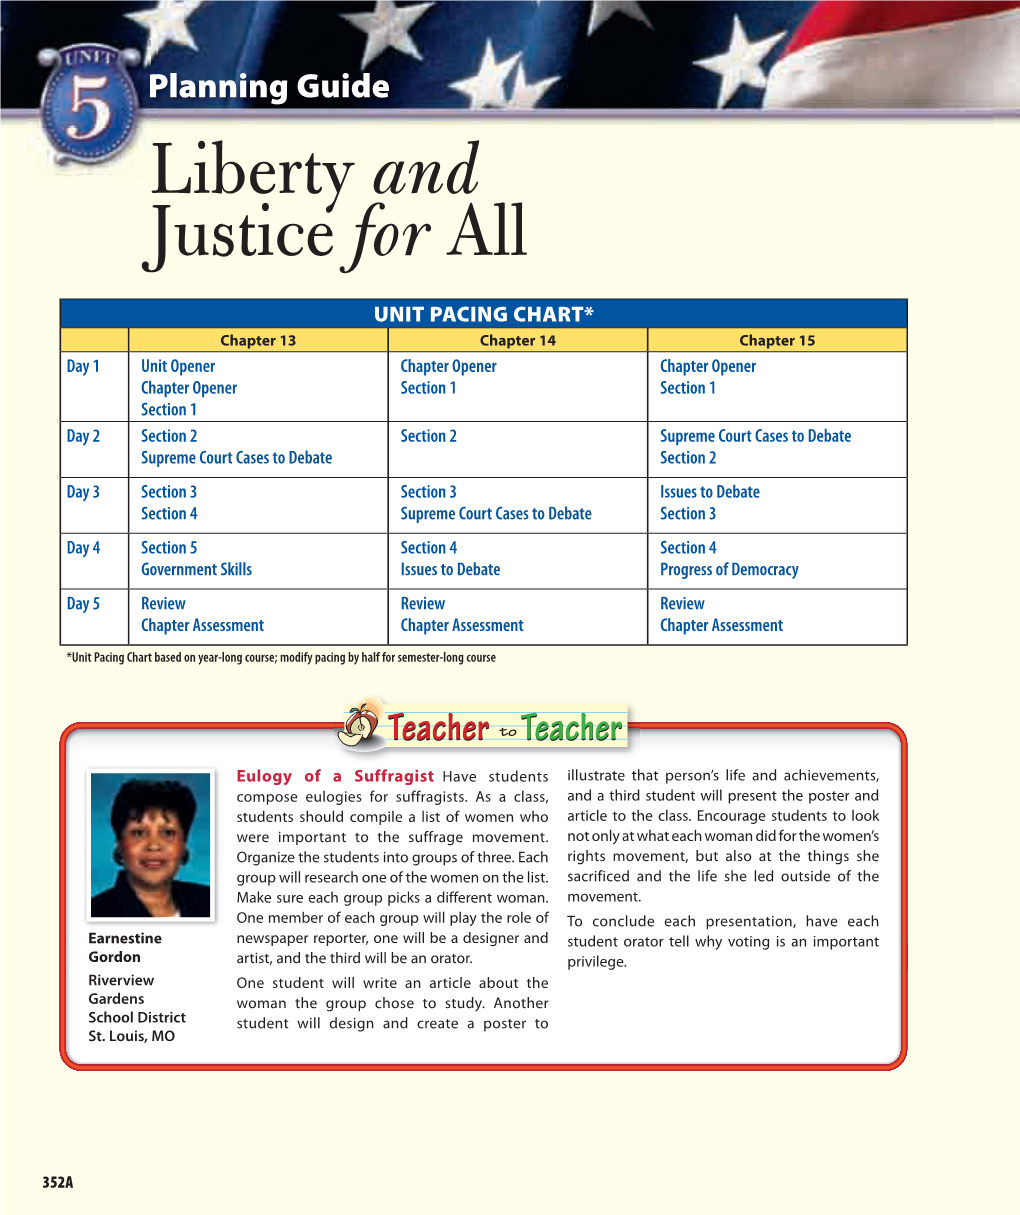 Planning Guide Liberty and Justice for All